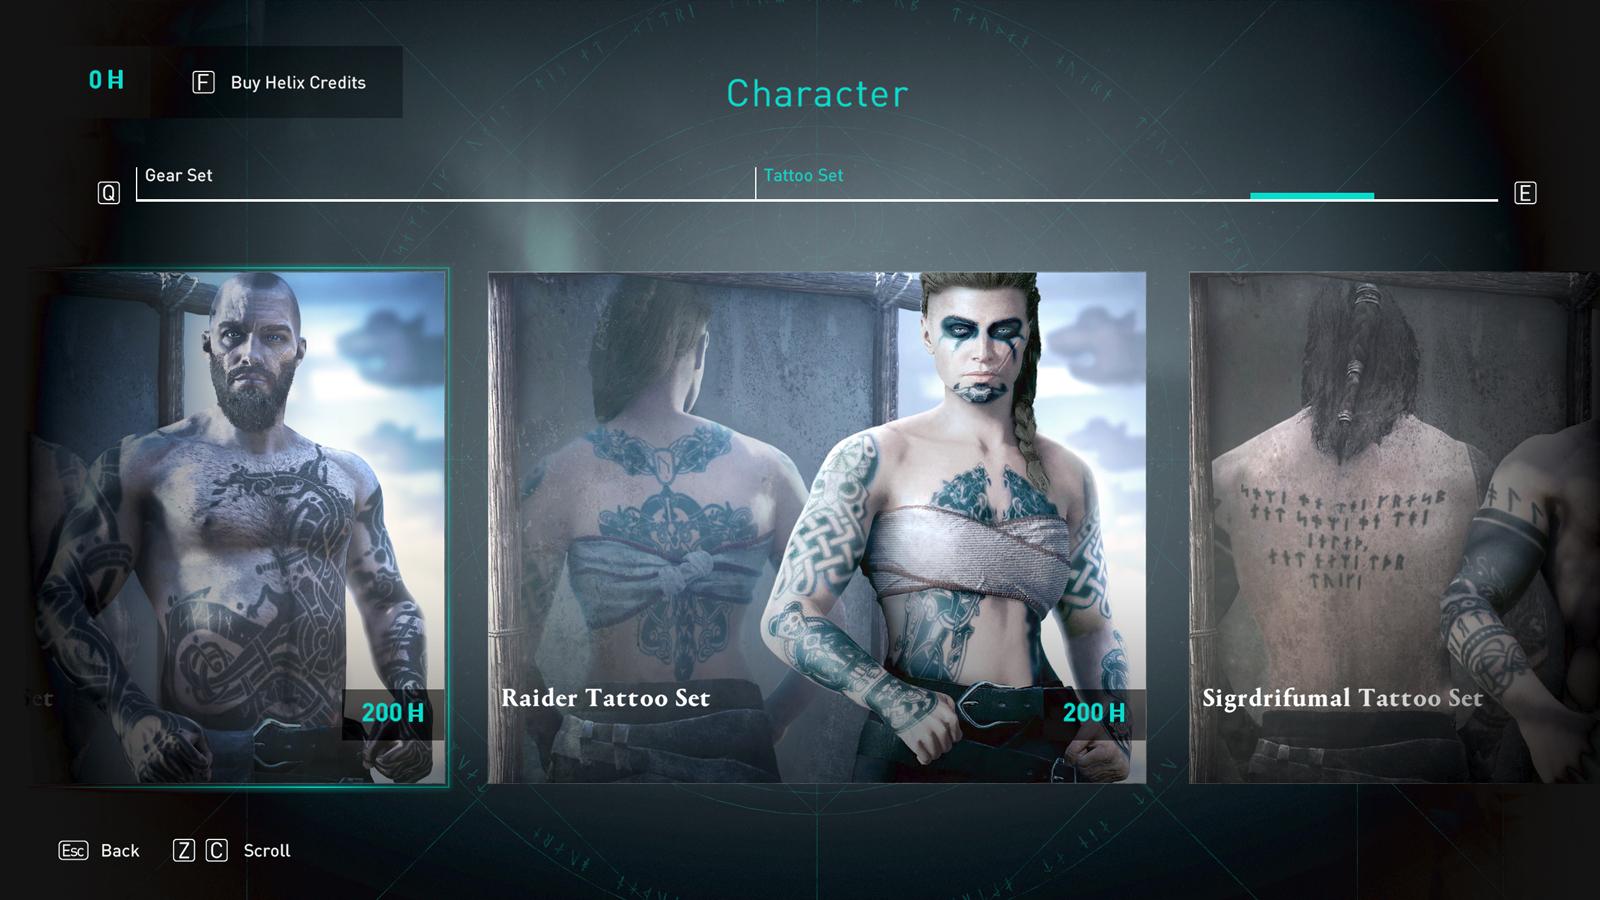 Assassin's Creed Valhalla store image showing the Raider Tattoo set skin cosmetic